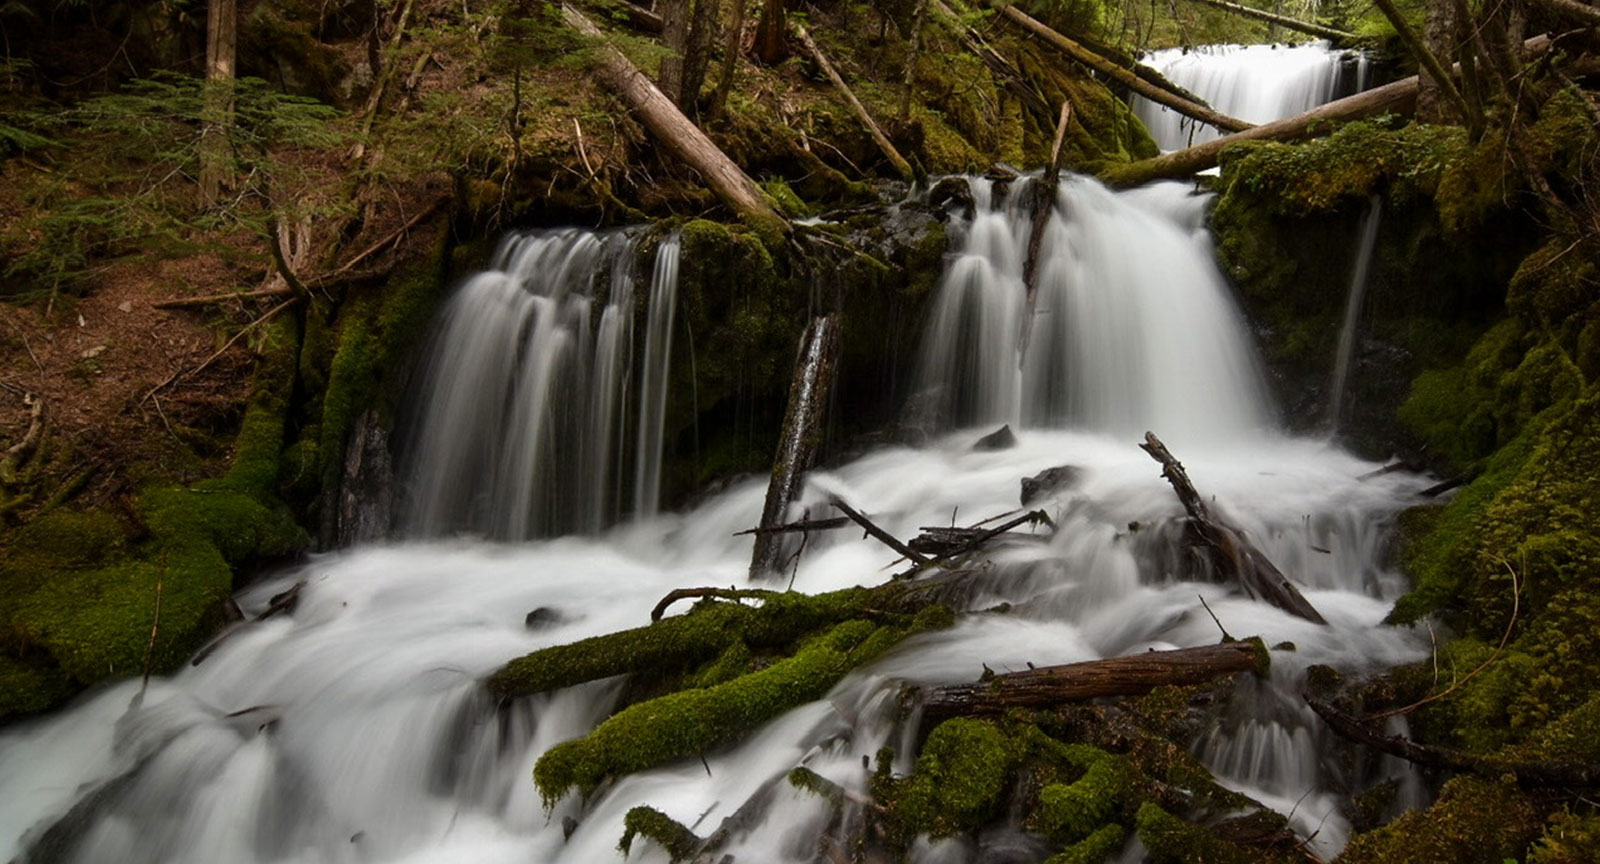 Hidden off-trail waterfall in Washington State’s Gifford Pinchot National Forest